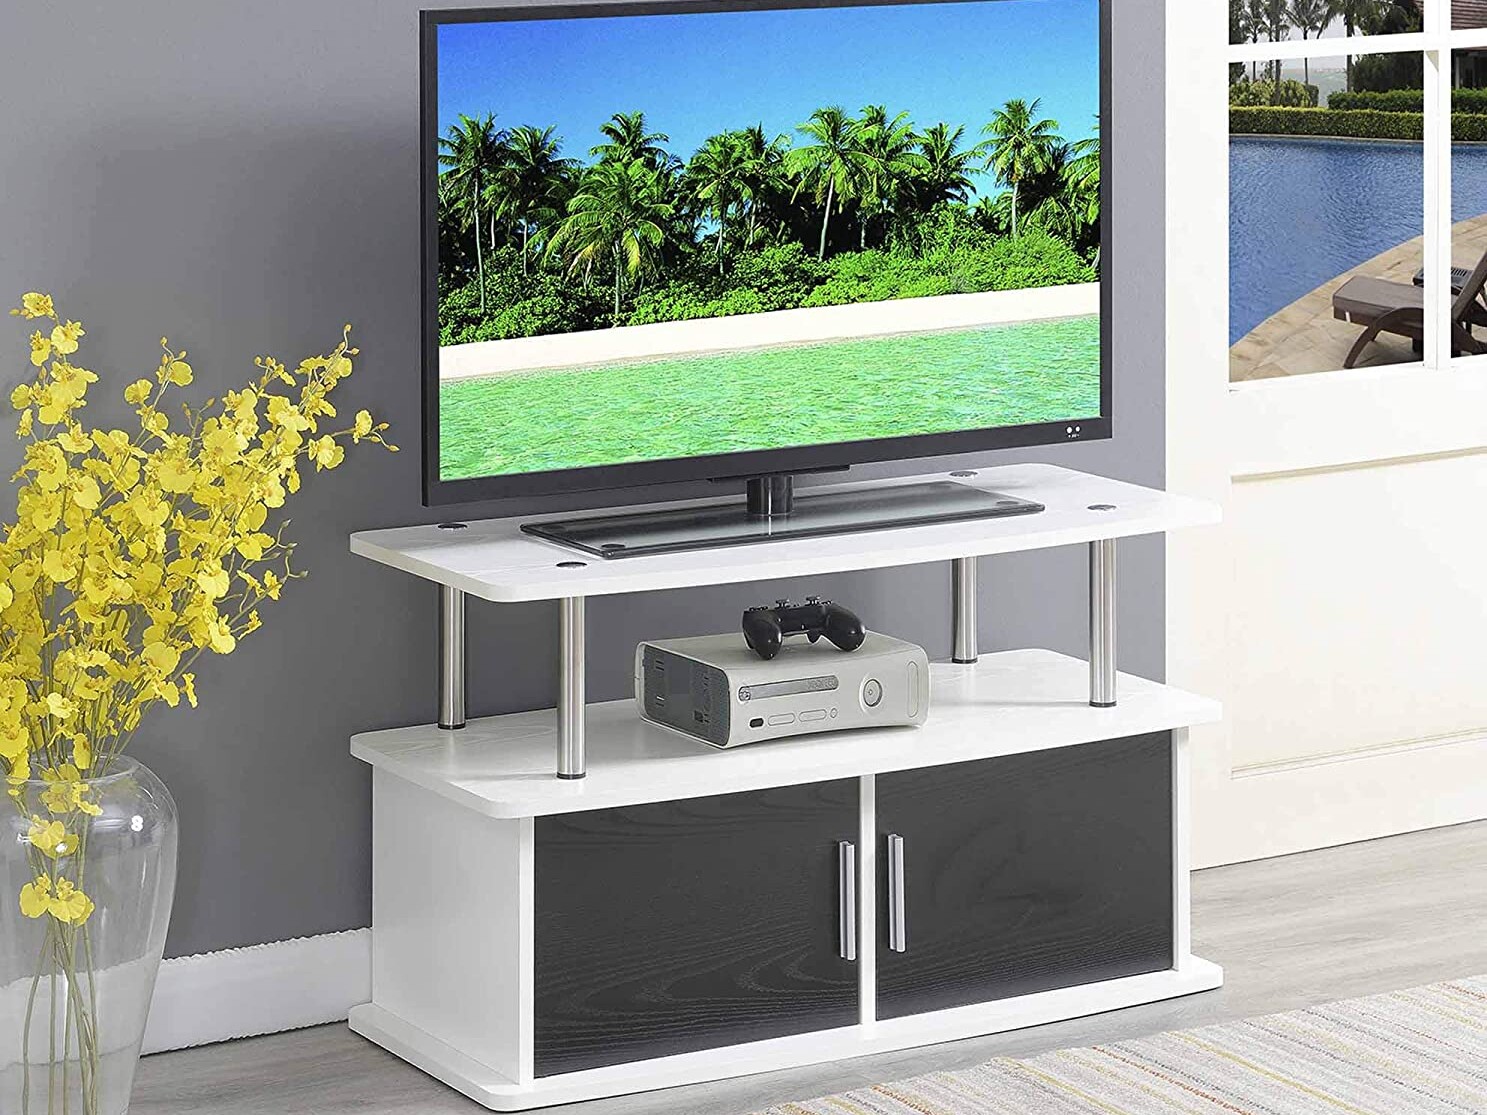 The Best Entertainment Centers for Small Rooms - Convenience Concepts Designs2Go Deluxe 2 Door TV Stand with Cabinets, White